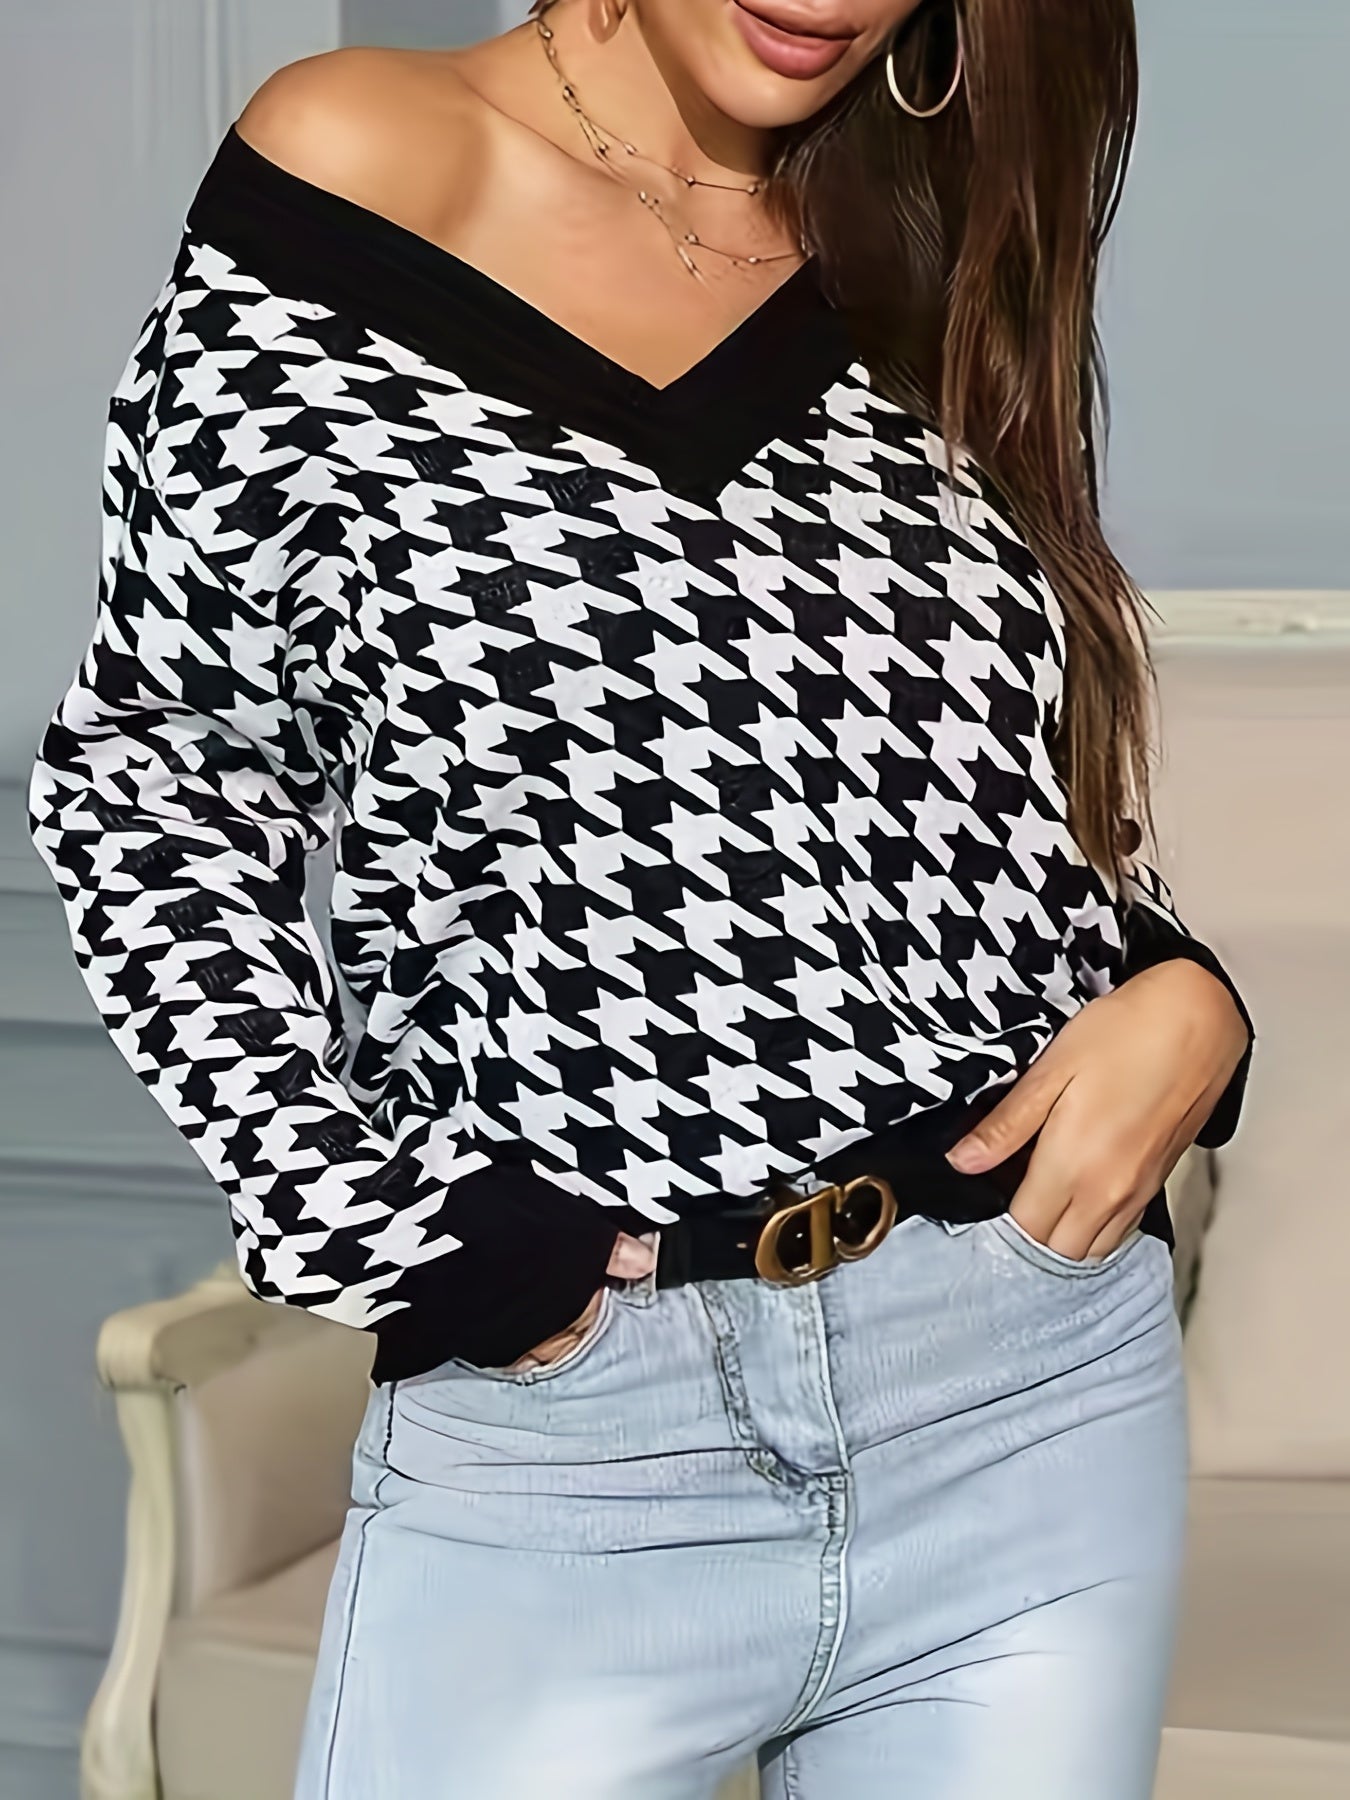 Antmvs Plus Size Casual Sweater, Women's Plus Houndstooth Print Long Sleeve V Neck Jumper